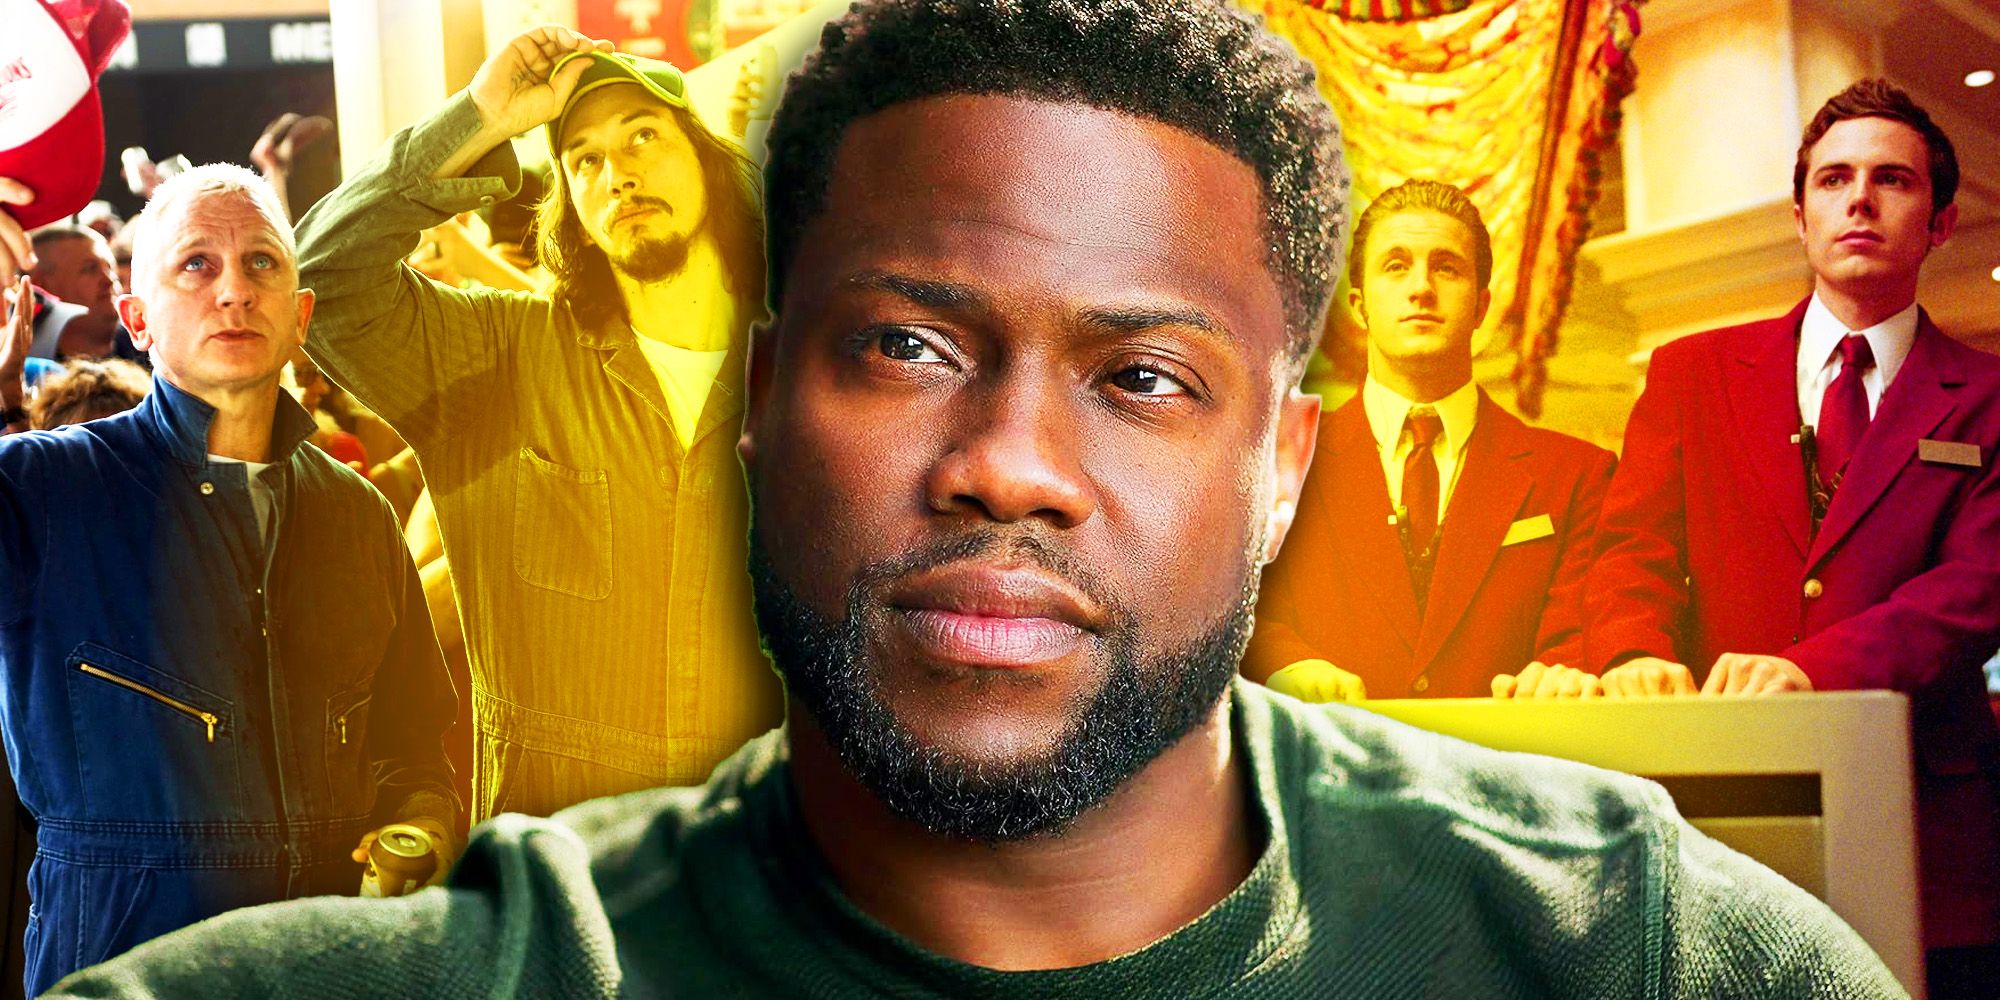 The Upside: Kevin Hart's new movie seems badly timed. There's a